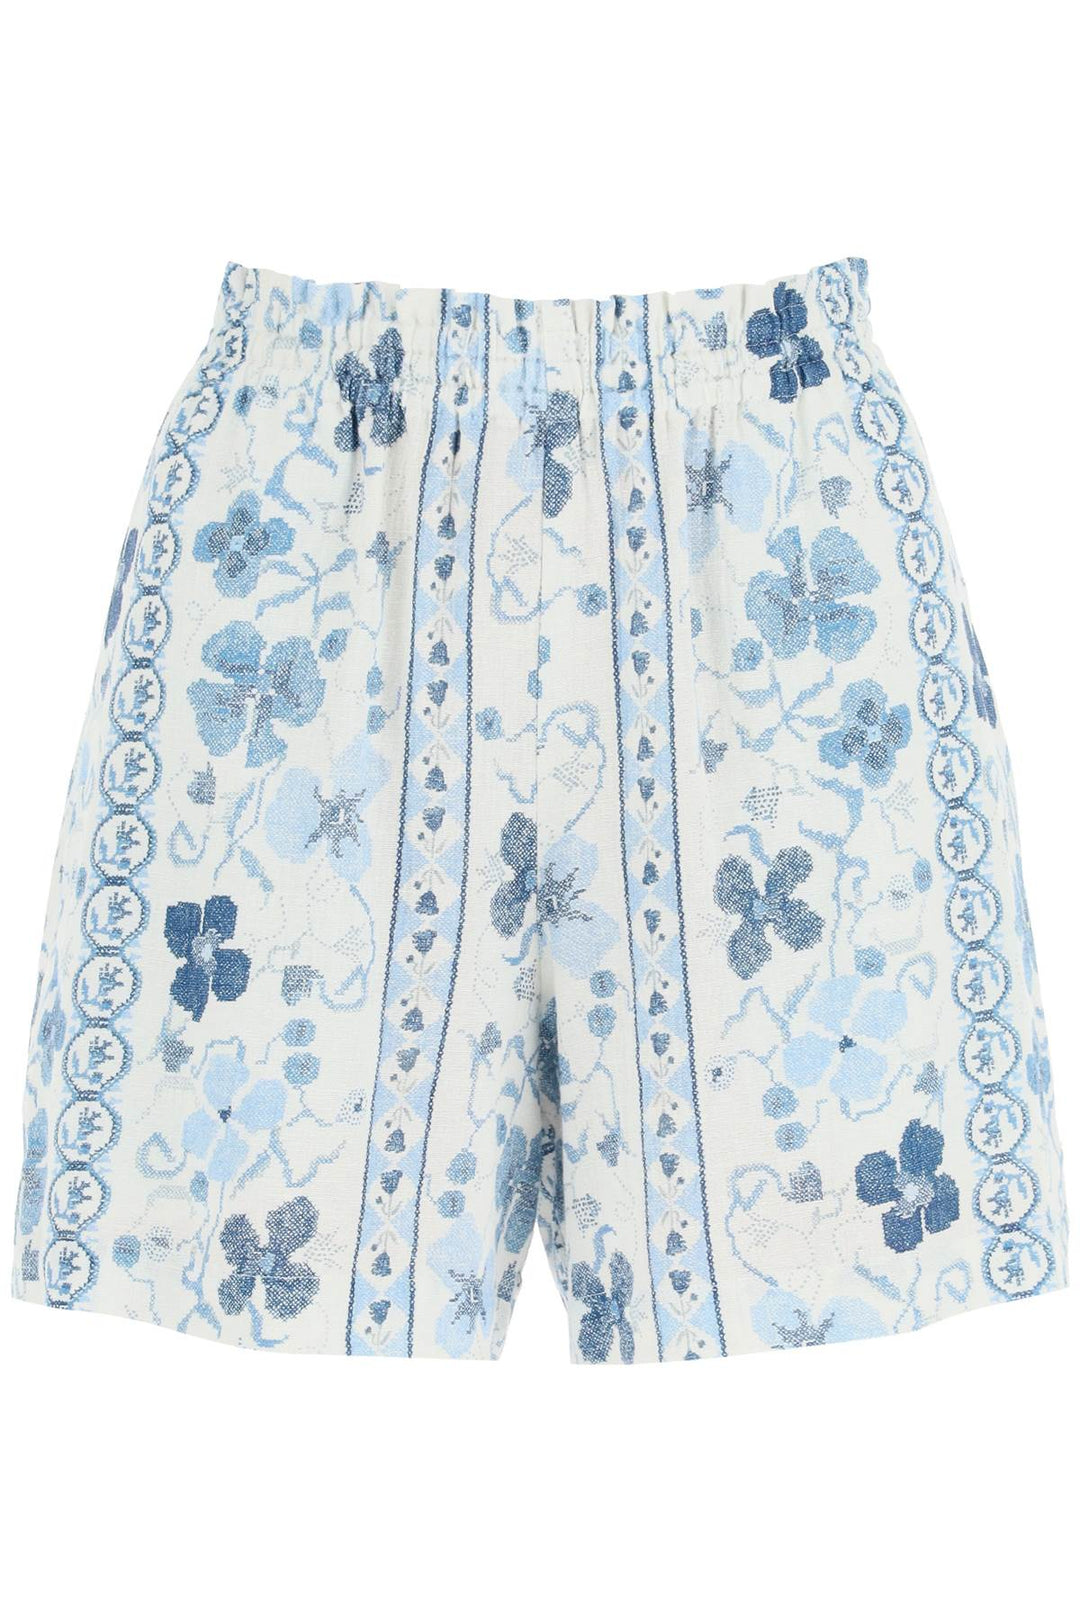 See By Chloe Printed Linen Blend Shorts   White